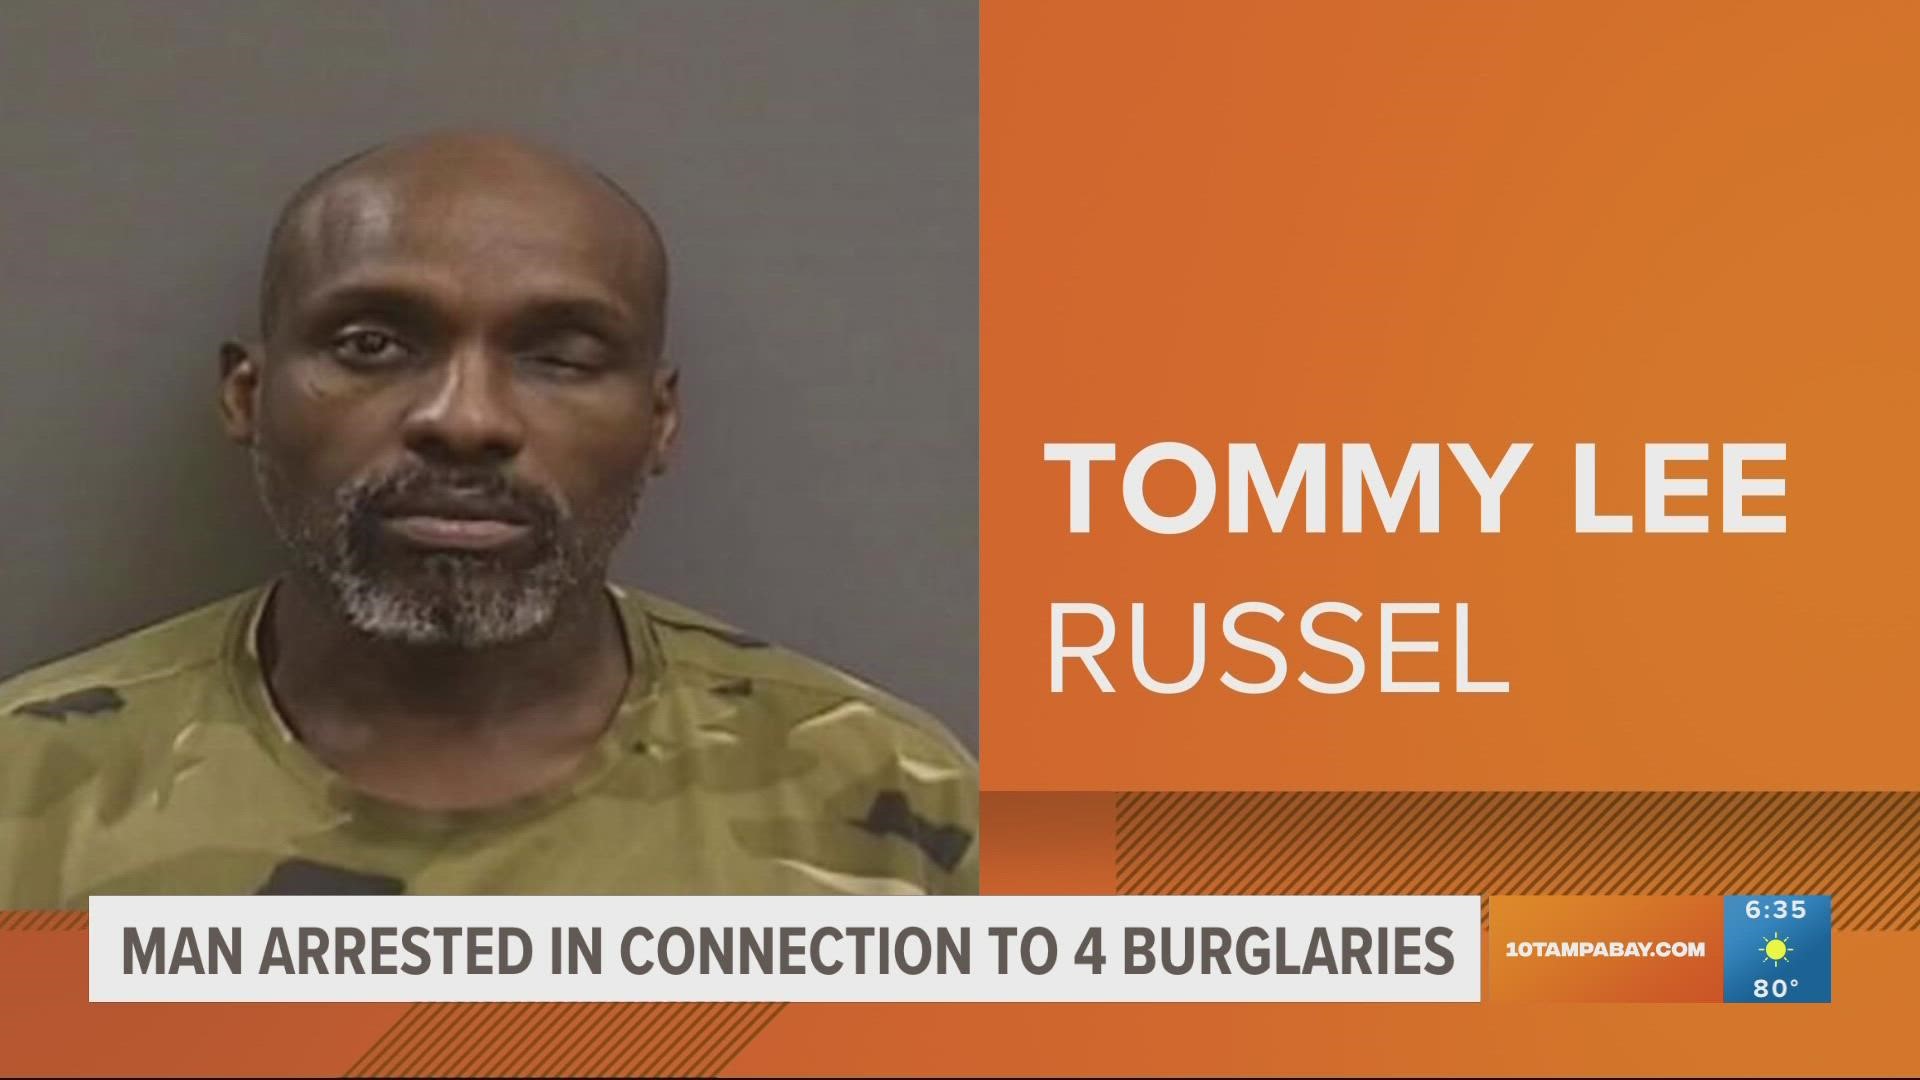 Officers say Tommy Lee Russel confessed to burglarizing a cigar business and a steak company.